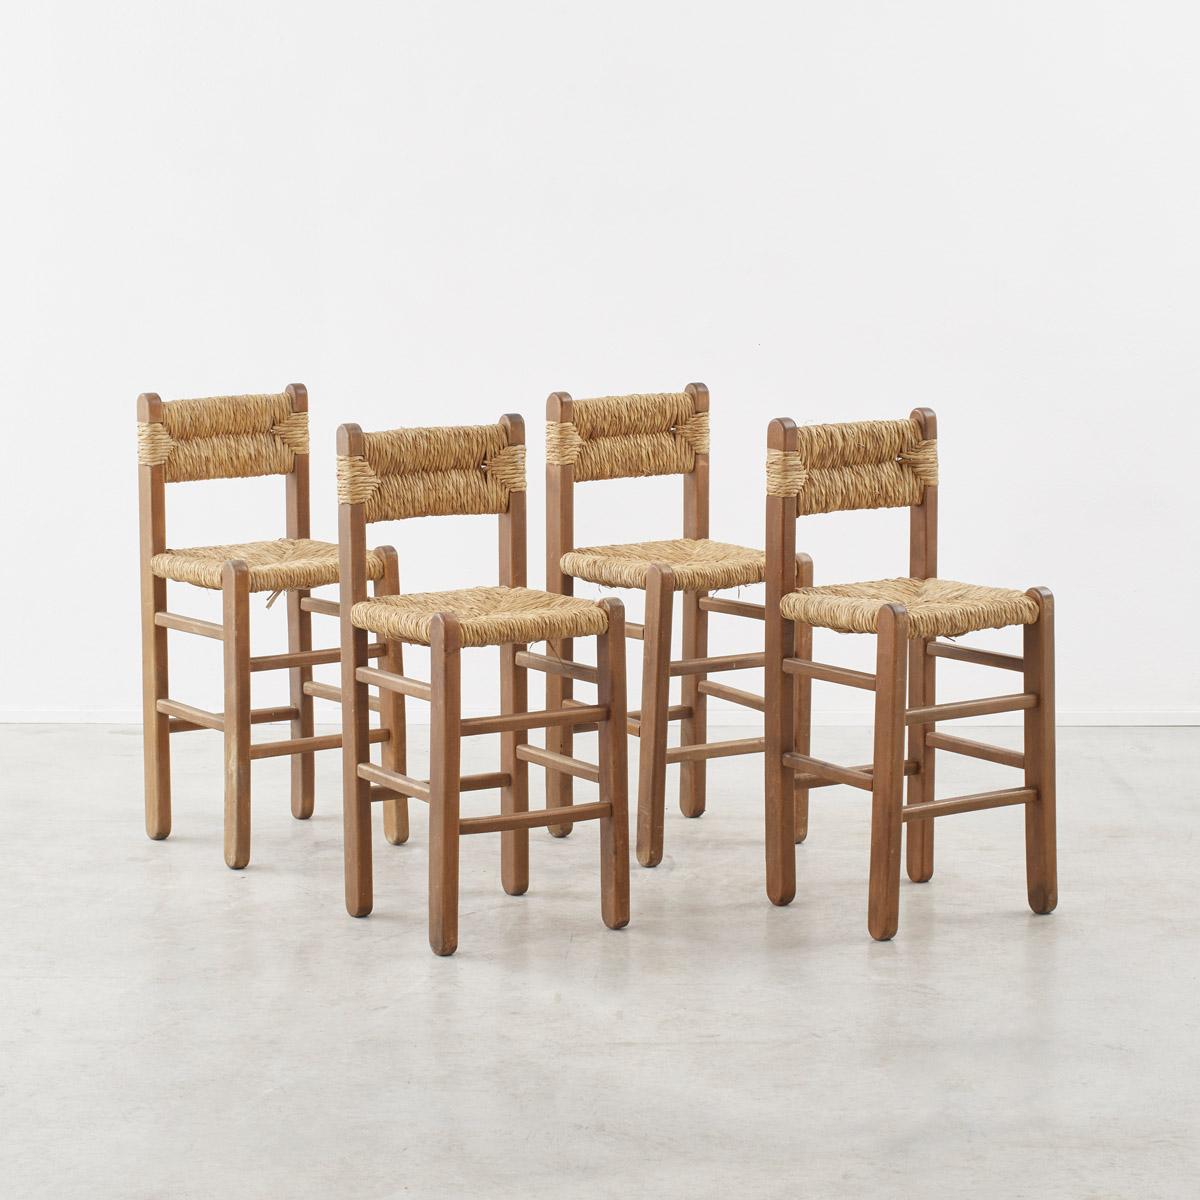 These French chunky wood late-twentieth century rush barstools have a lovely character about them and would be ideal along a breakfast bar or a high table. The woven rush back rest and seat sit comfortably on the pine frame, reminiscent of Charlotte